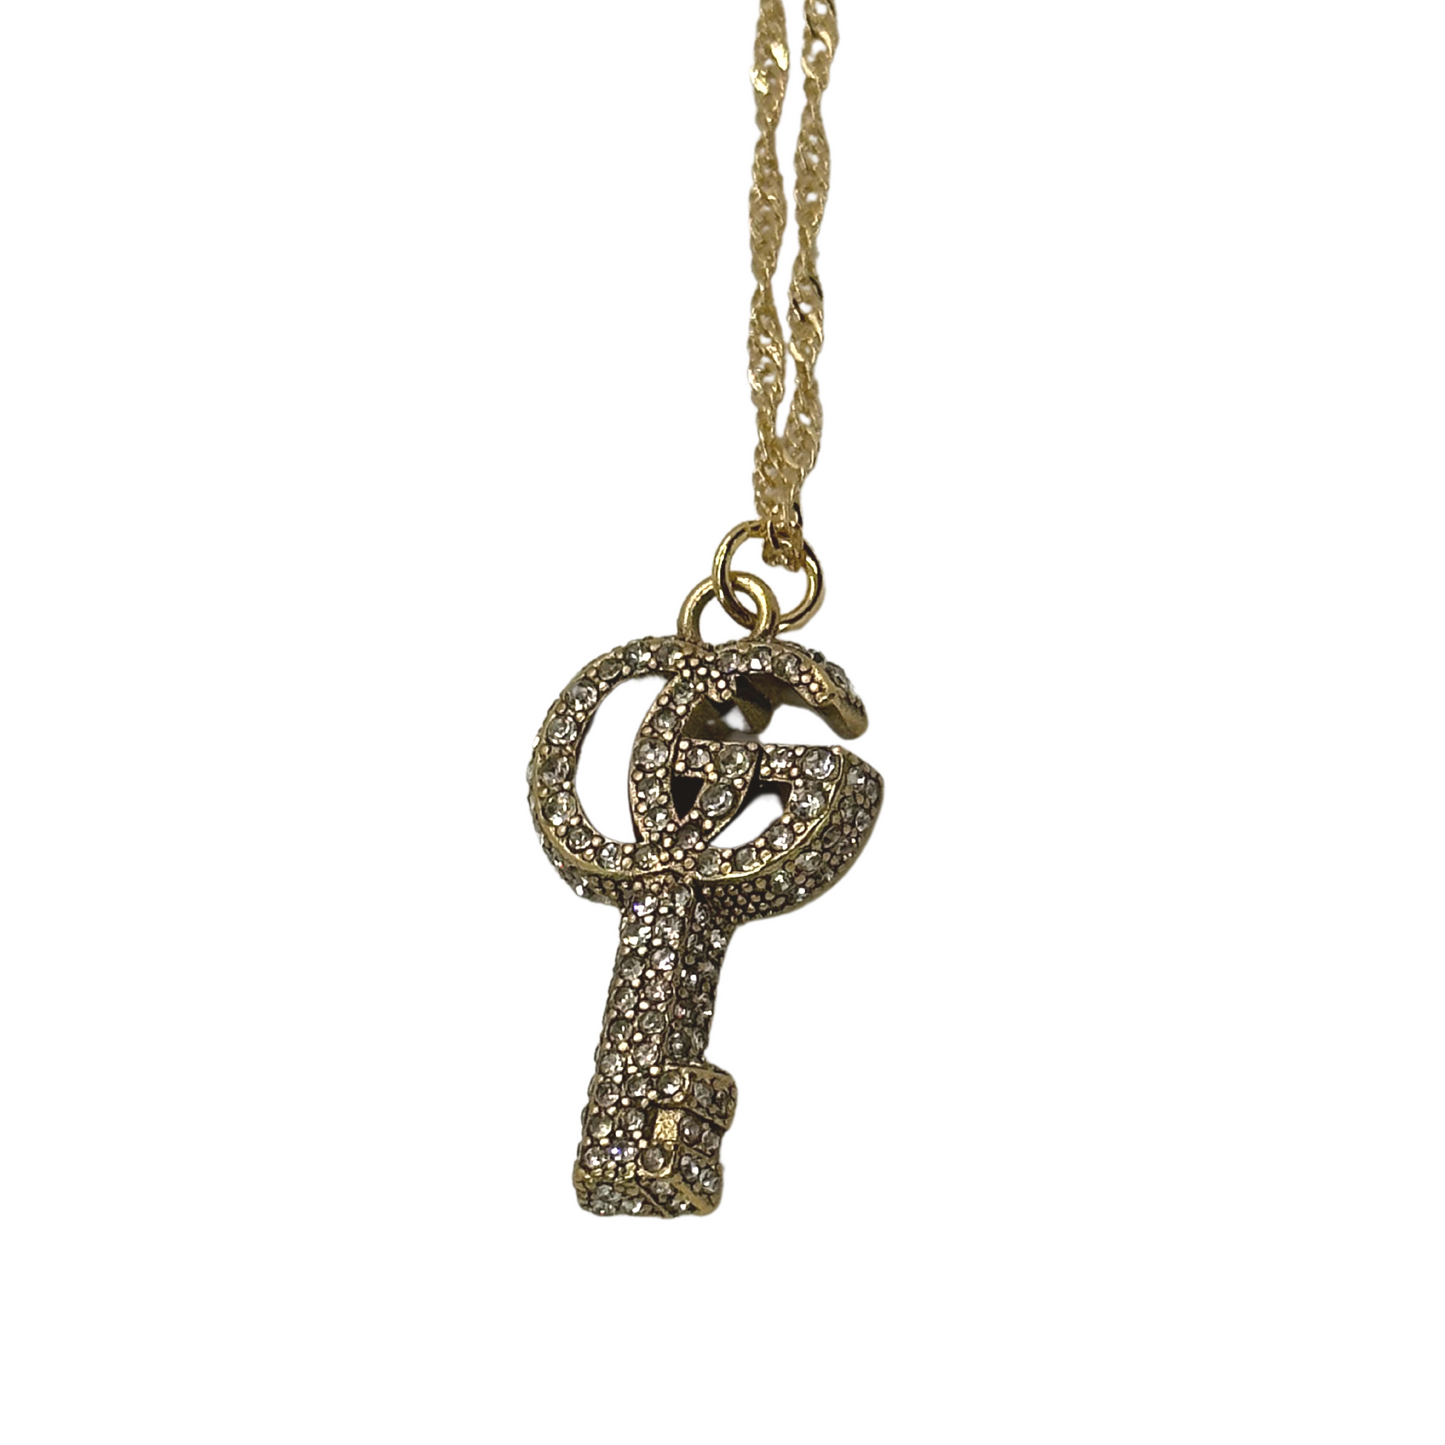 Authentic Gucci Double G Key | Reworked Gold 16" Necklace